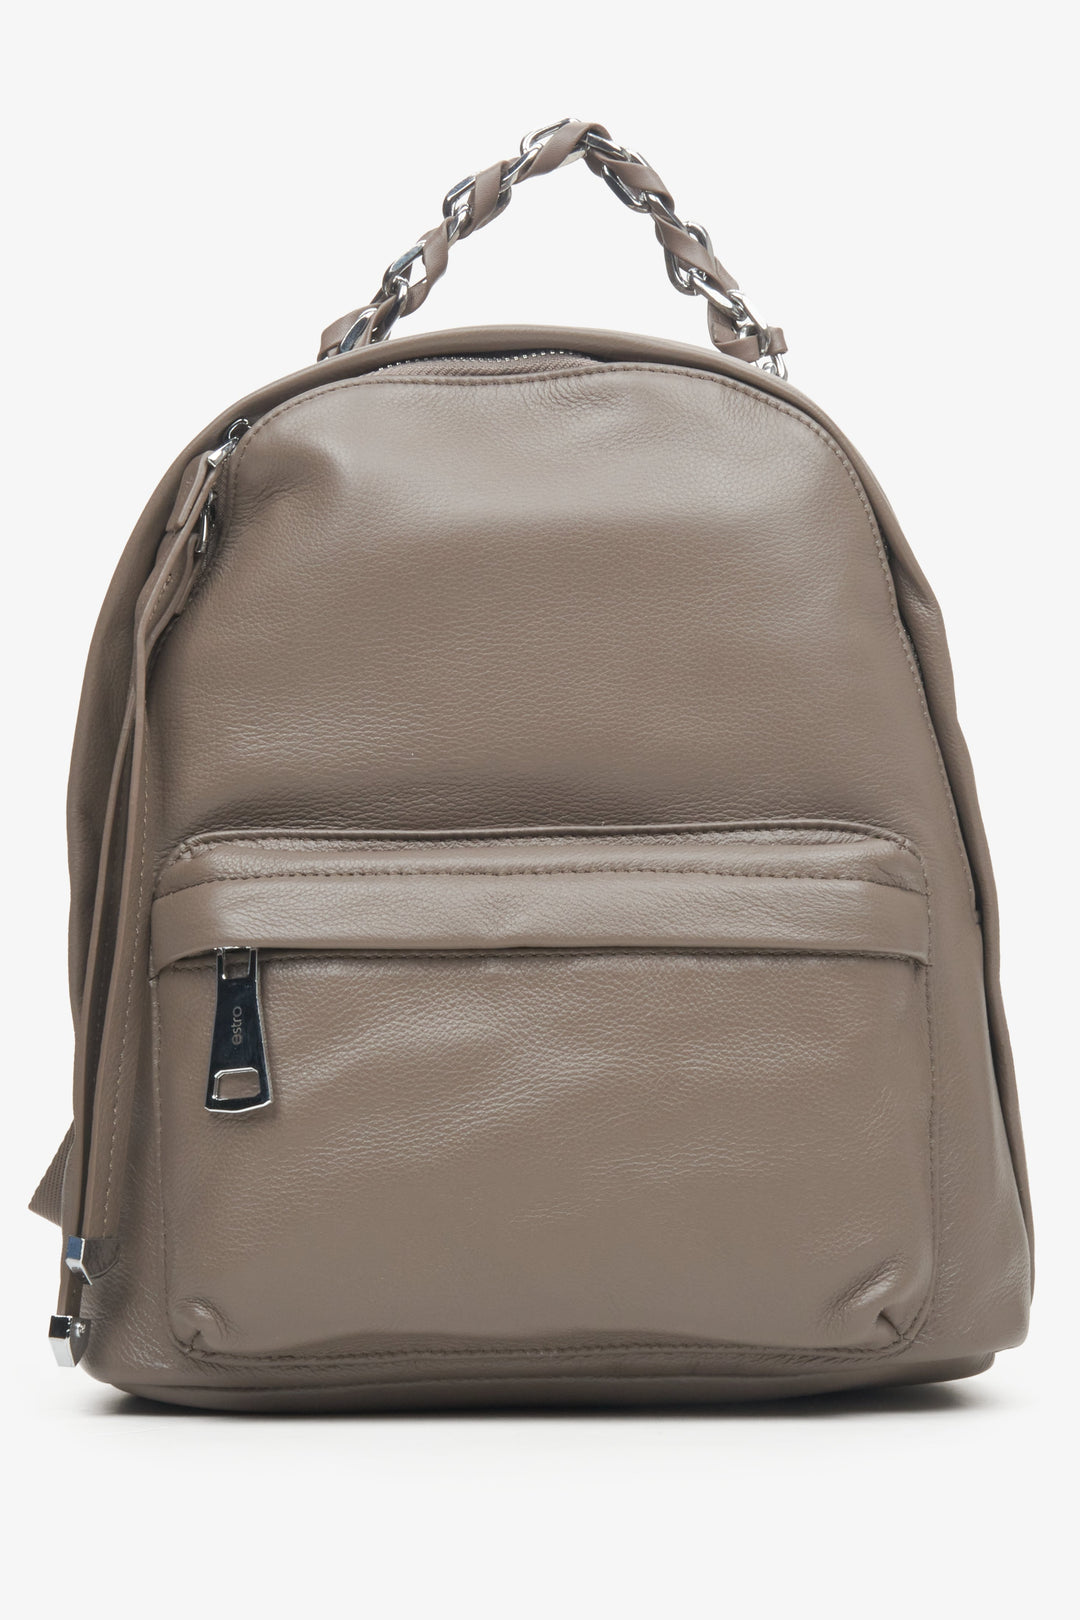 Women's Grey & Brown Backpack made of Genuine Leather with Silver Details Estro ER00113753.